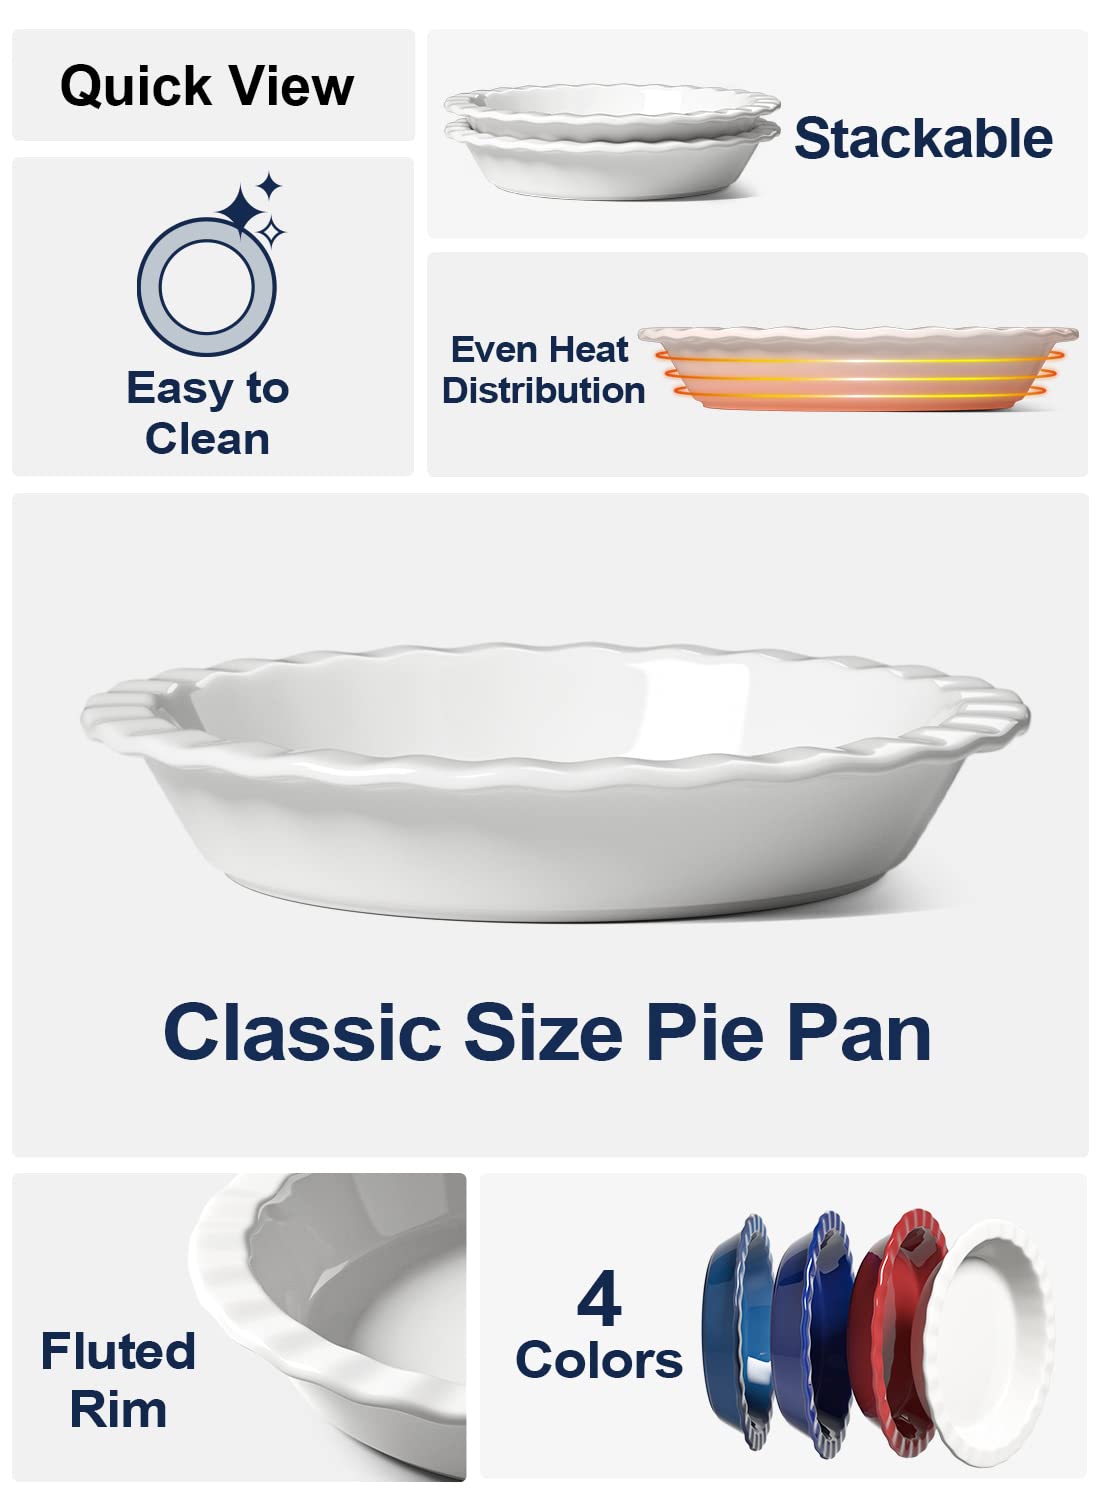 LE TAUCI Ceramic Pie Pans for Baking, 9 Inches Pie Plate for Apple Pie, Round Baking Dish, 36 Ounce Deep Dish Pie Pan, Set of 2, White